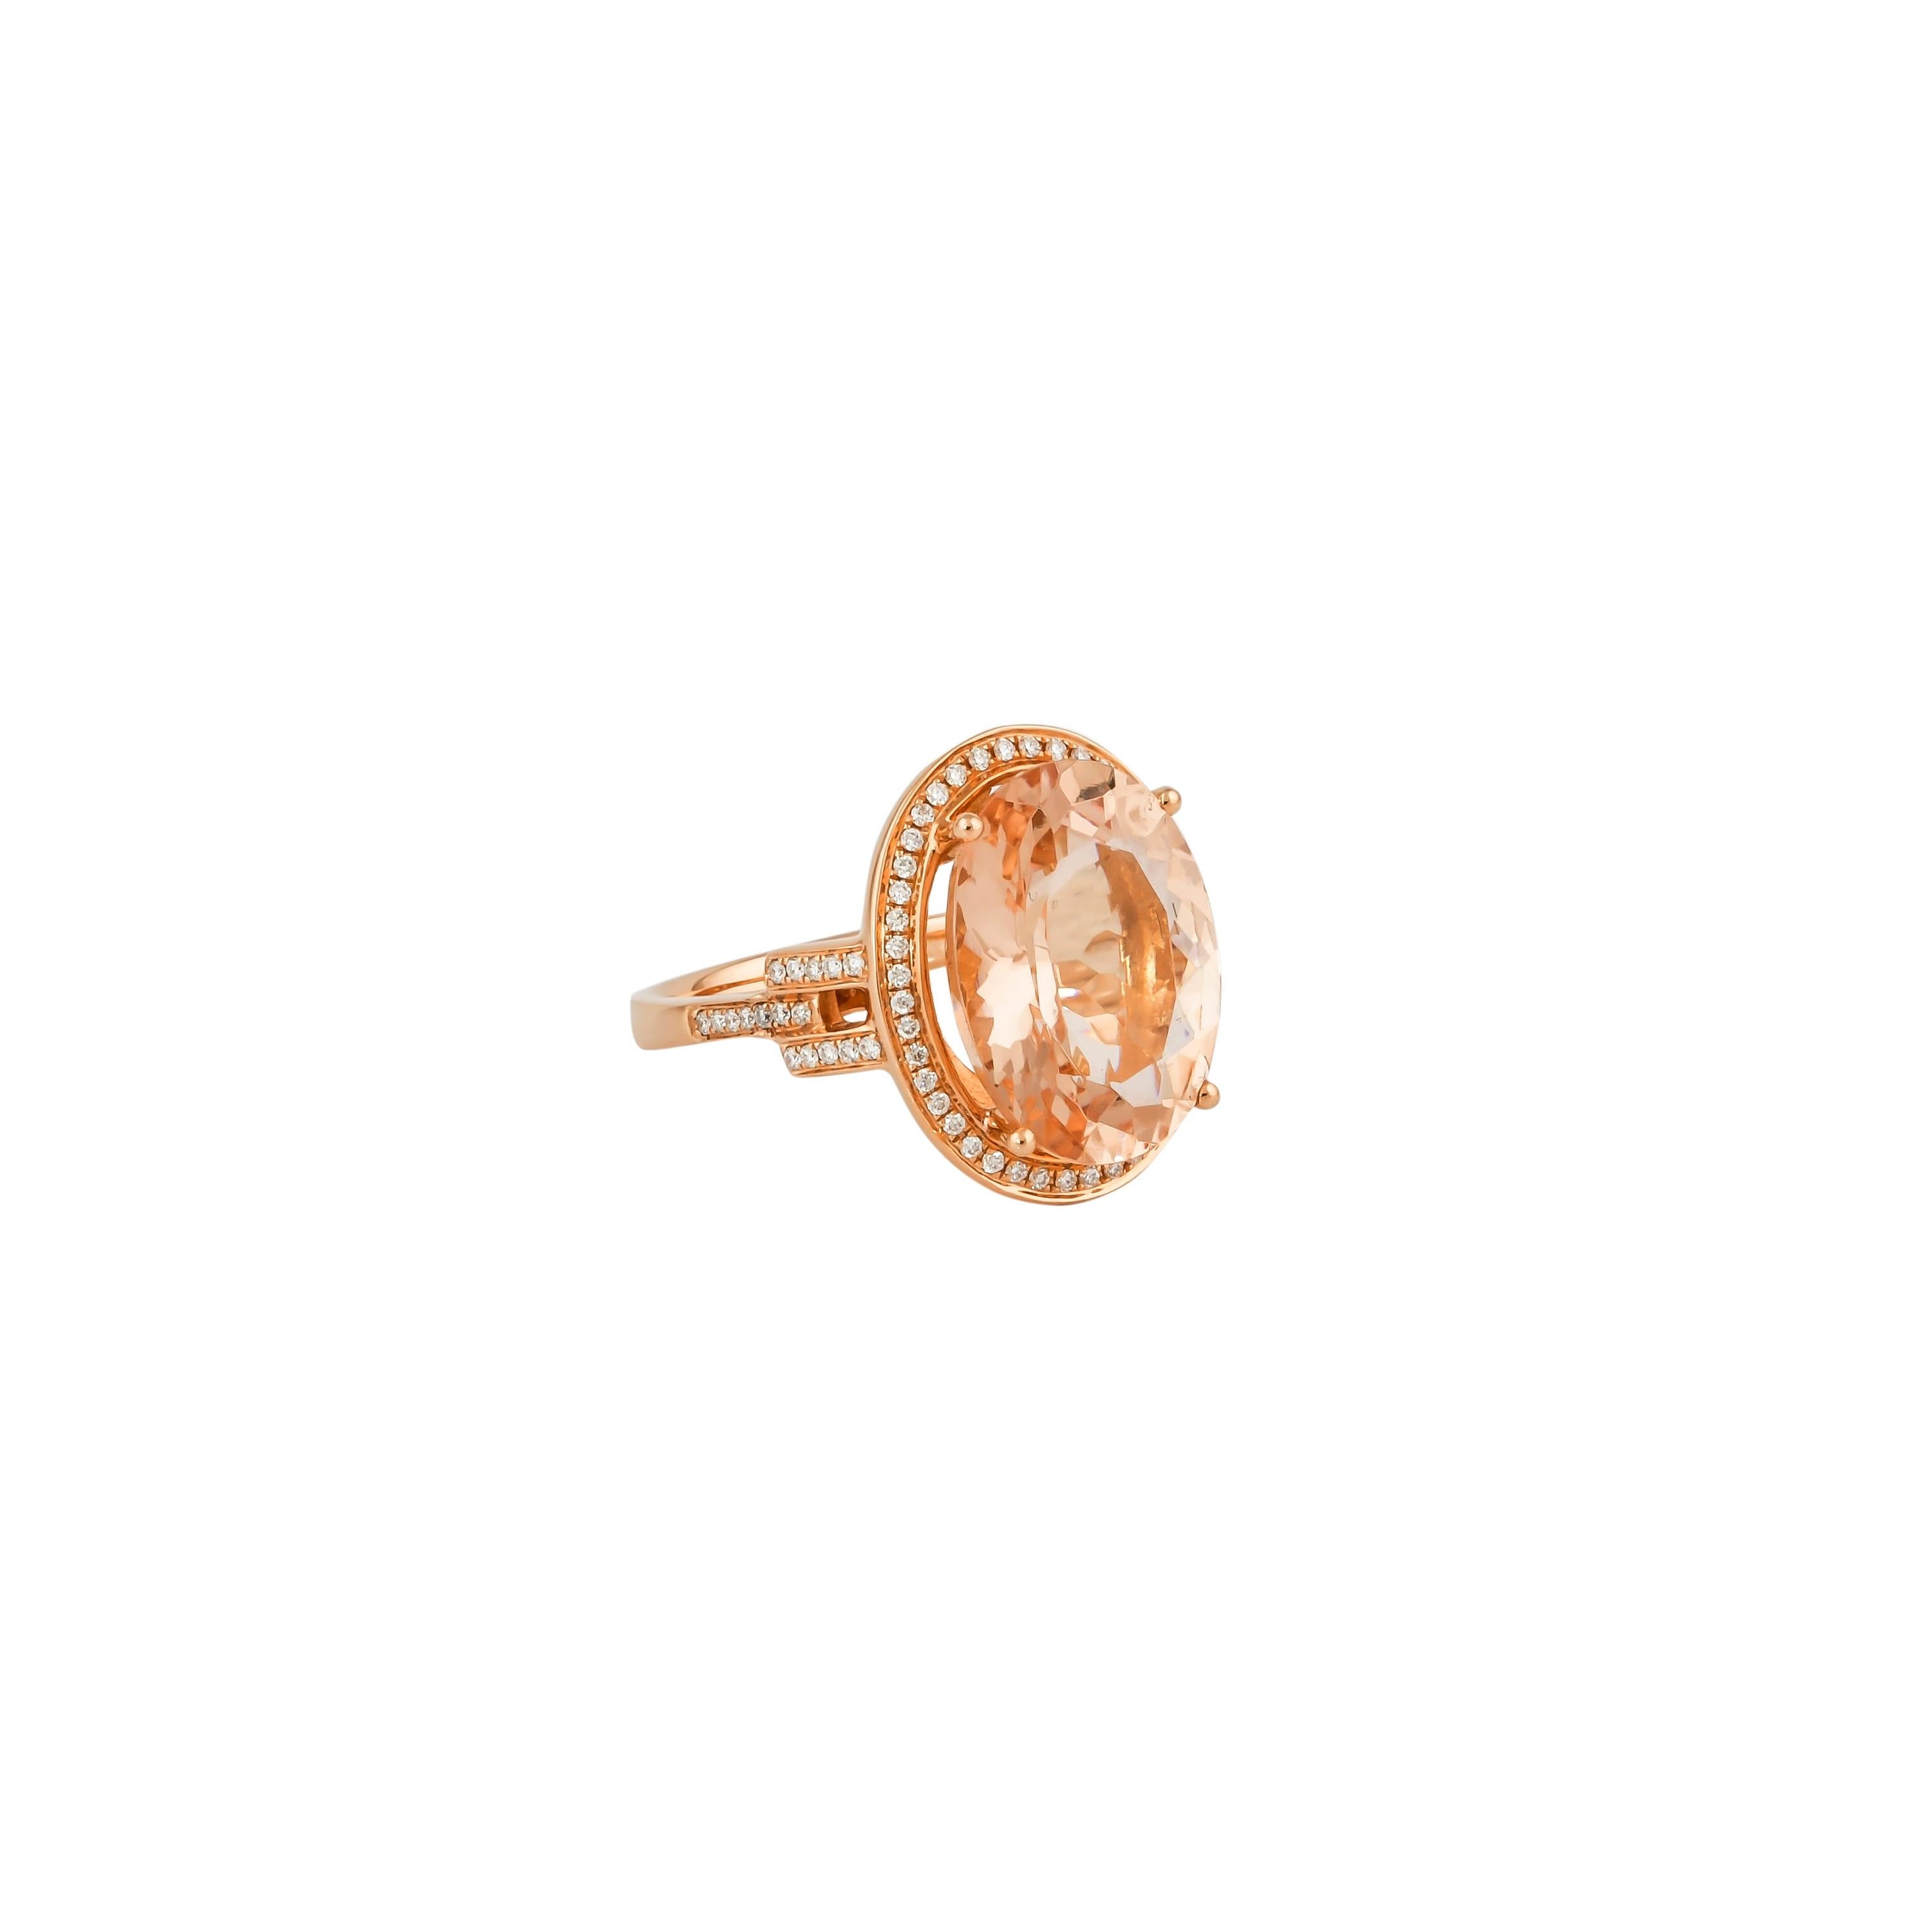 This collection features an array of magnificent morganites! Accented with diamonds these rings are made in rose gold and present a classic yet elegant look. 

Classic morganite ring in 18K rose gold with diamonds. 

Morganite: 7.82 carat oval